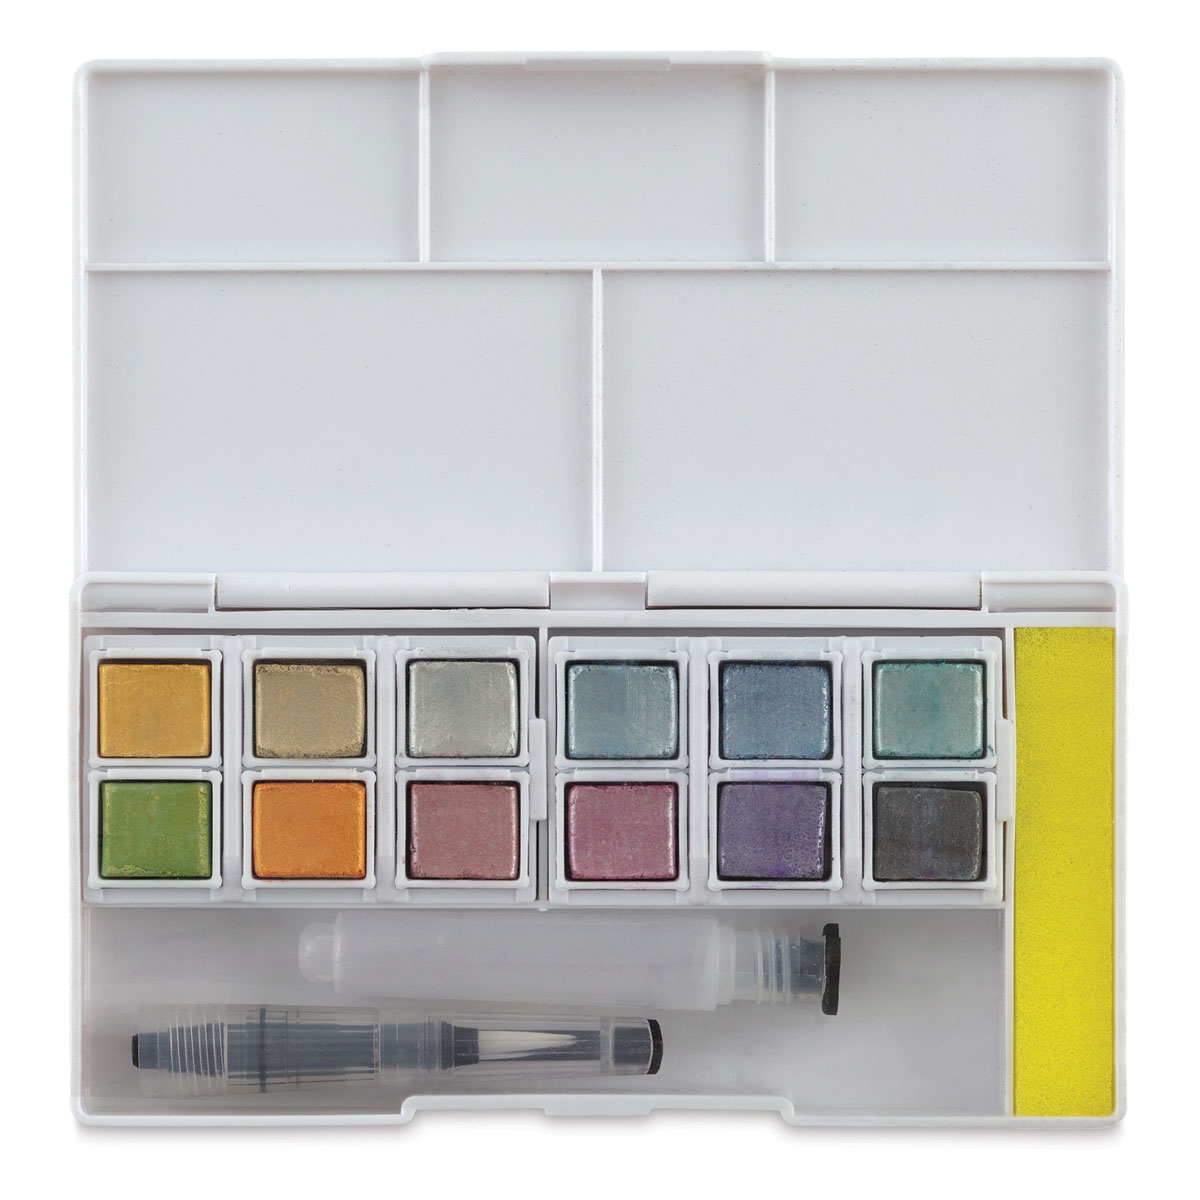 Graphitint Paint Pan Set by Derwent // Unboxing & Swatching 🎨 